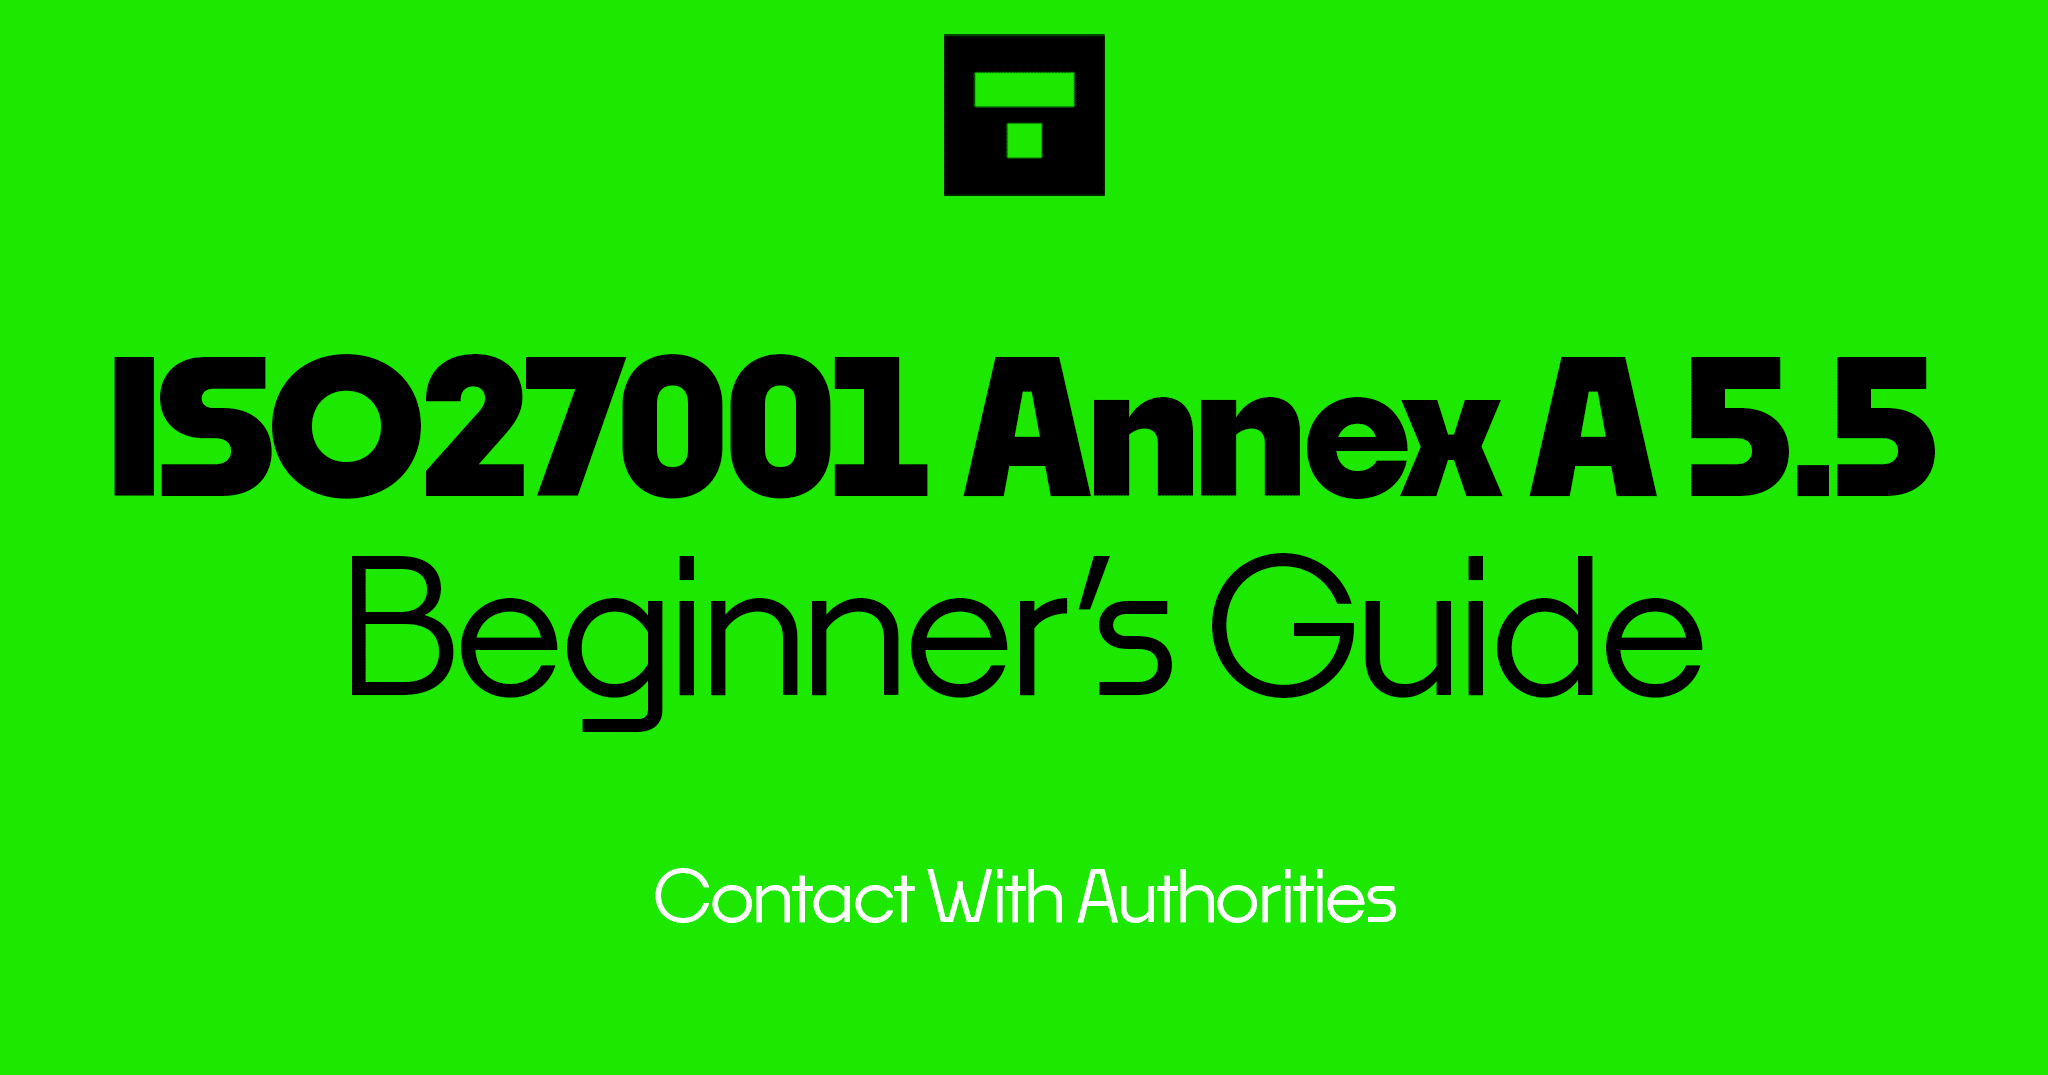 ISO 27001 Annex A 5.5 Contact With Authorities Beginner’s Guide